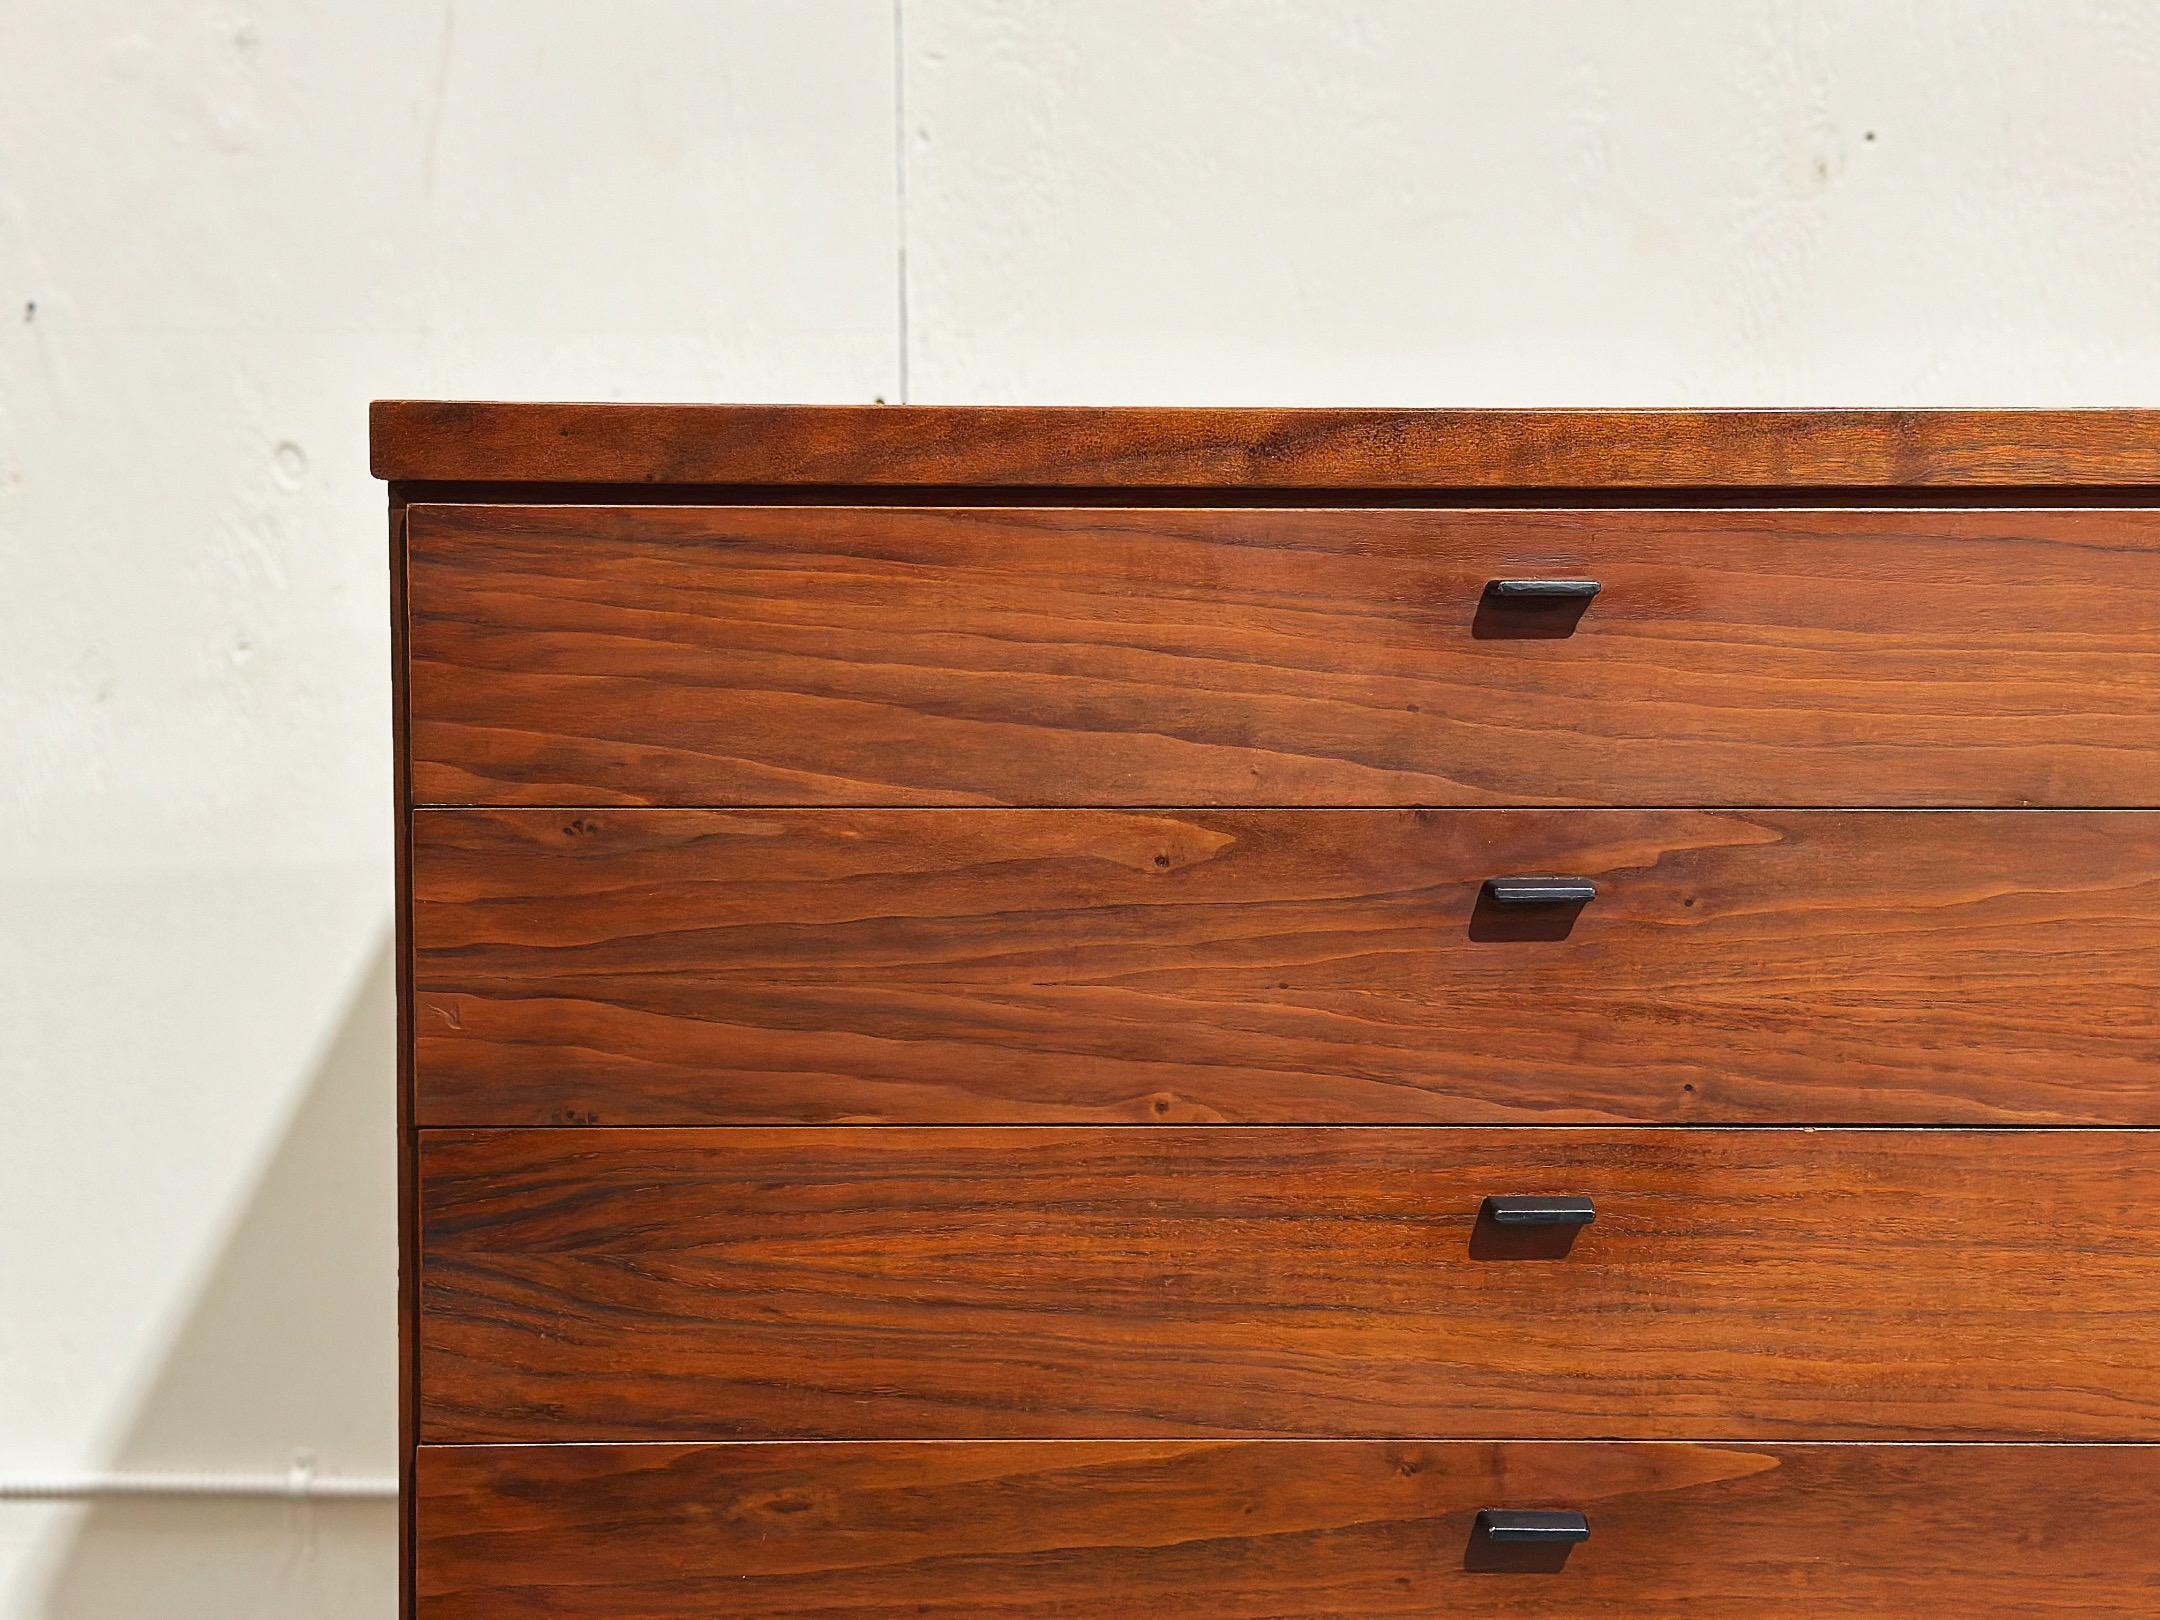 Vintage mid century modern chest of drawers by Jack Cartwright for Founders. Part of his 